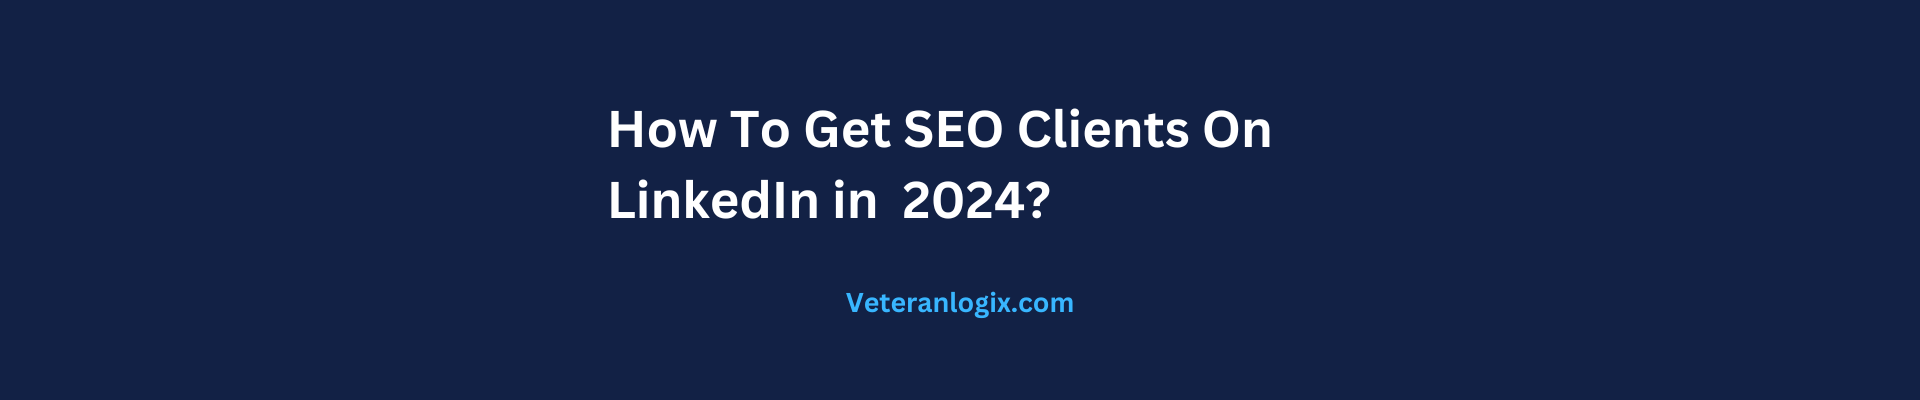 how to get seo clients on linkedin